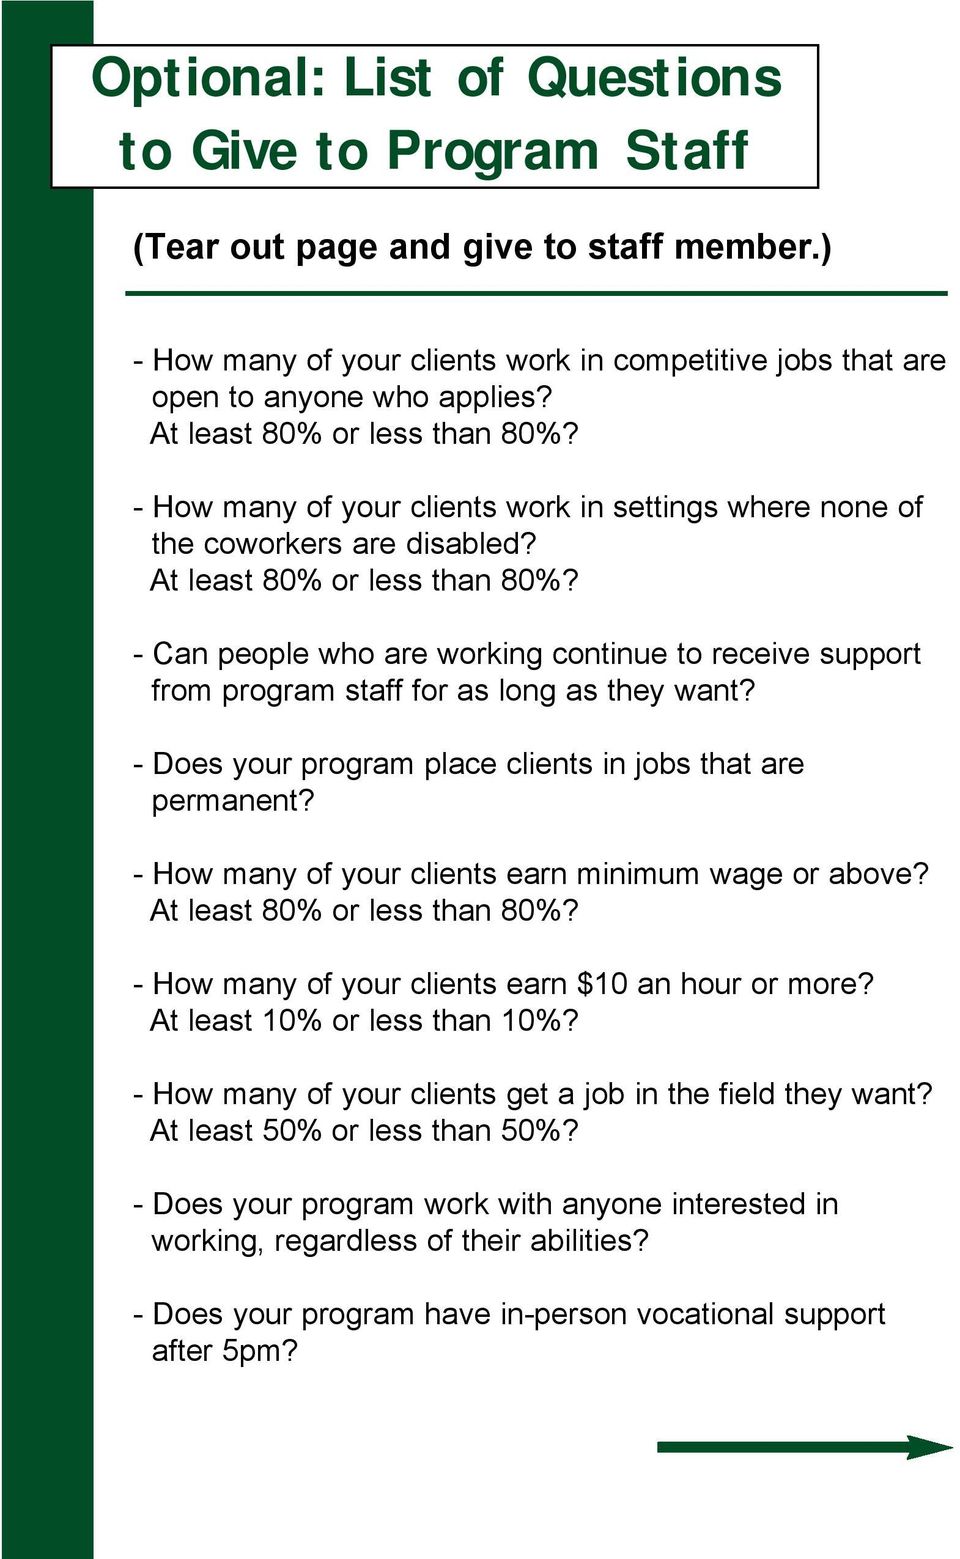 - Can people who are working continue to receive support from program staff for as long as they want? - Does your program place clients in jobs that are permanent?